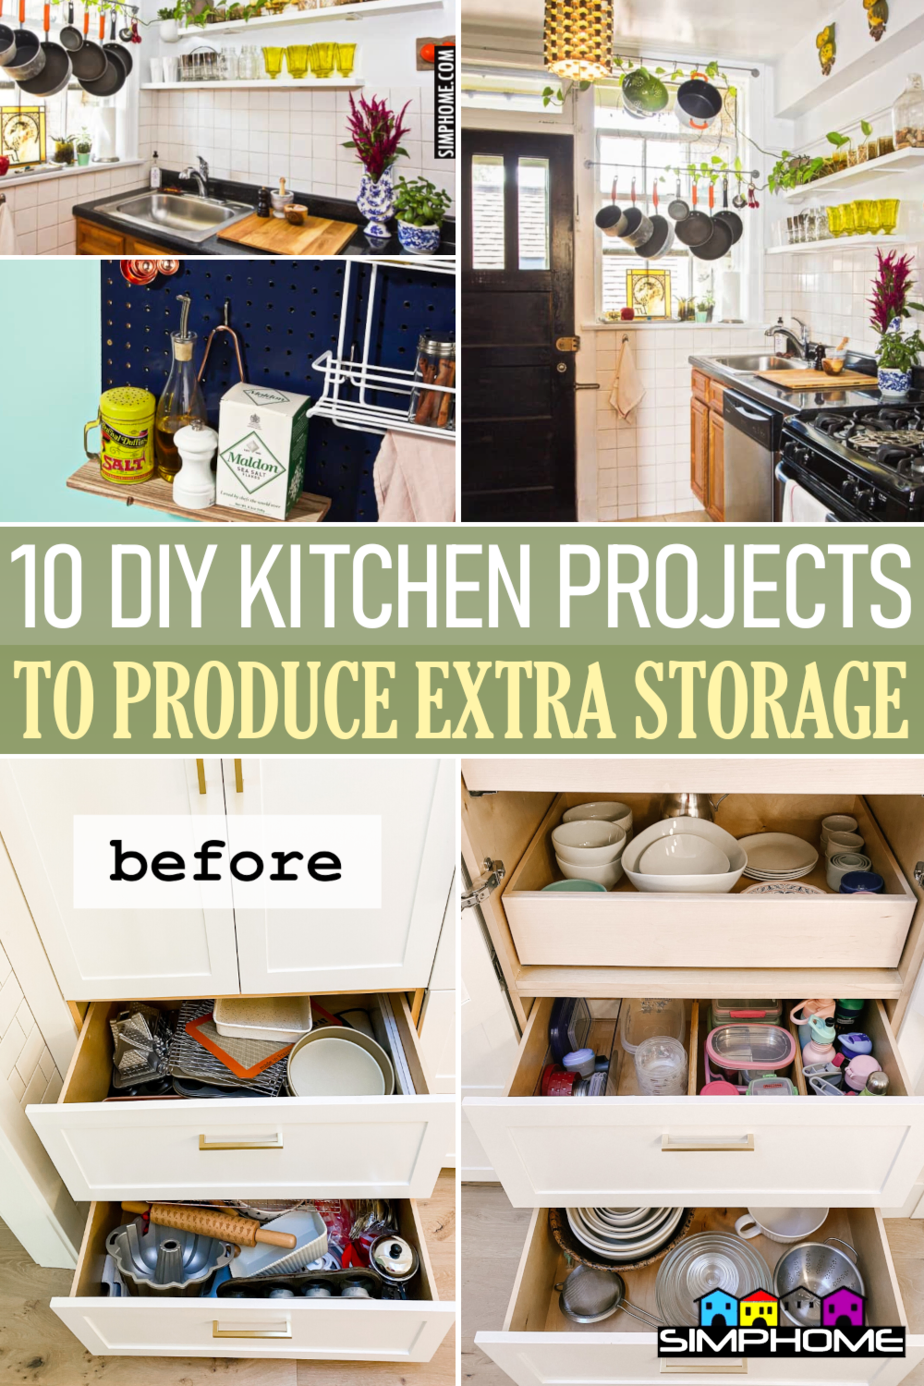 10 DIY Kitchen Projects To Produce Extra Storge via Simphome.comFeatured